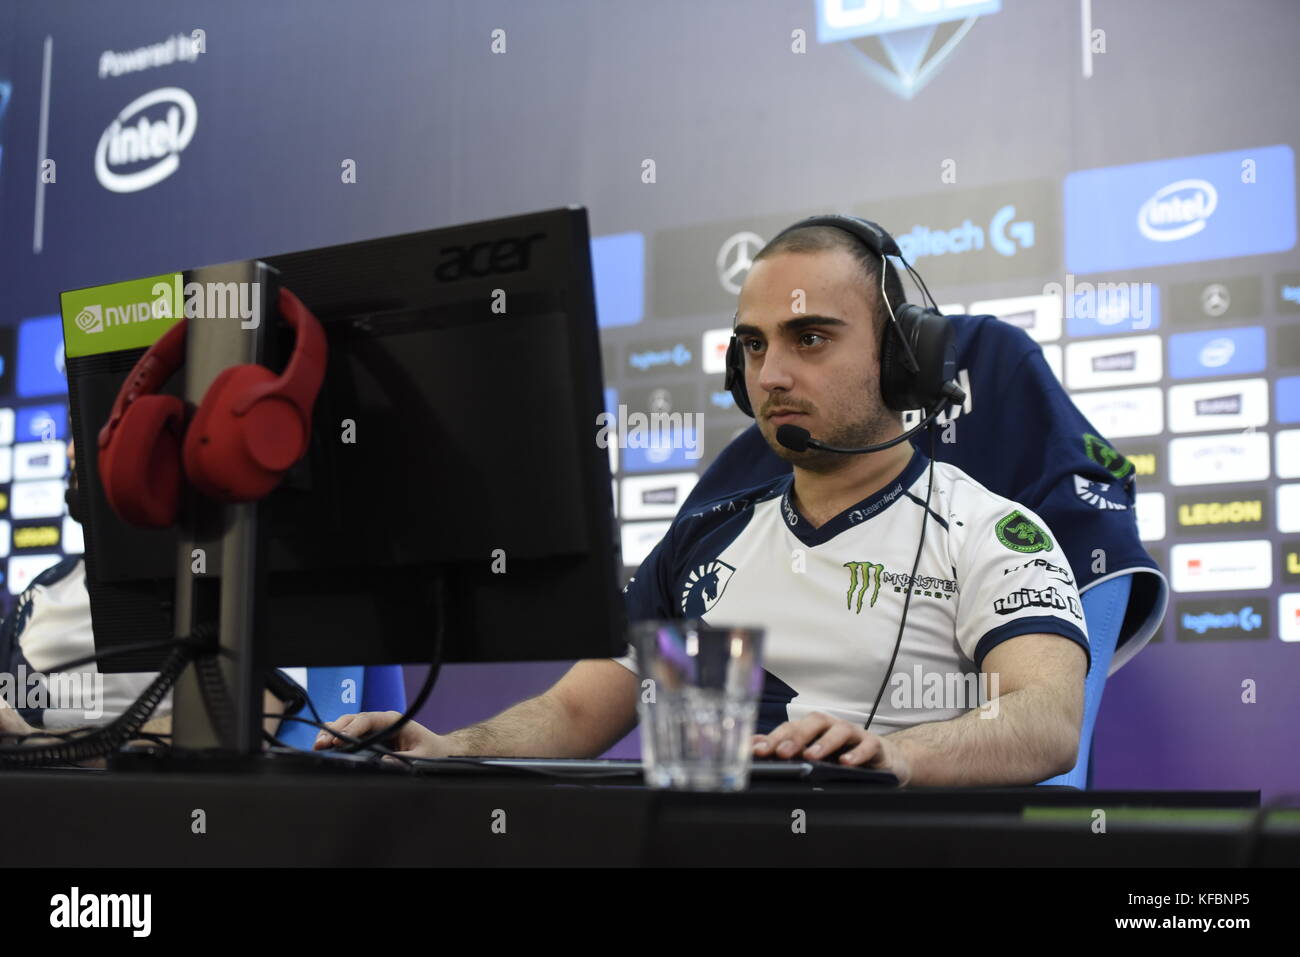 German Dota 2 professional Kuro Salehi Takhasomi (KuroKy) of Team Liquid sits in front of a computer during the preliminary round of the e-sports event ESL One at a hotel in Hamburg, Germany, 26 October 2017. The first matches are carried out at the hotel, before the event continues on 28 October at the Barclaycard Arena with more than 10,000 expected audience members. Prize with a total worth of a Million US-Dollar can be won in the tournament. Photo: Marek Majewsky/dpa Stock Photo